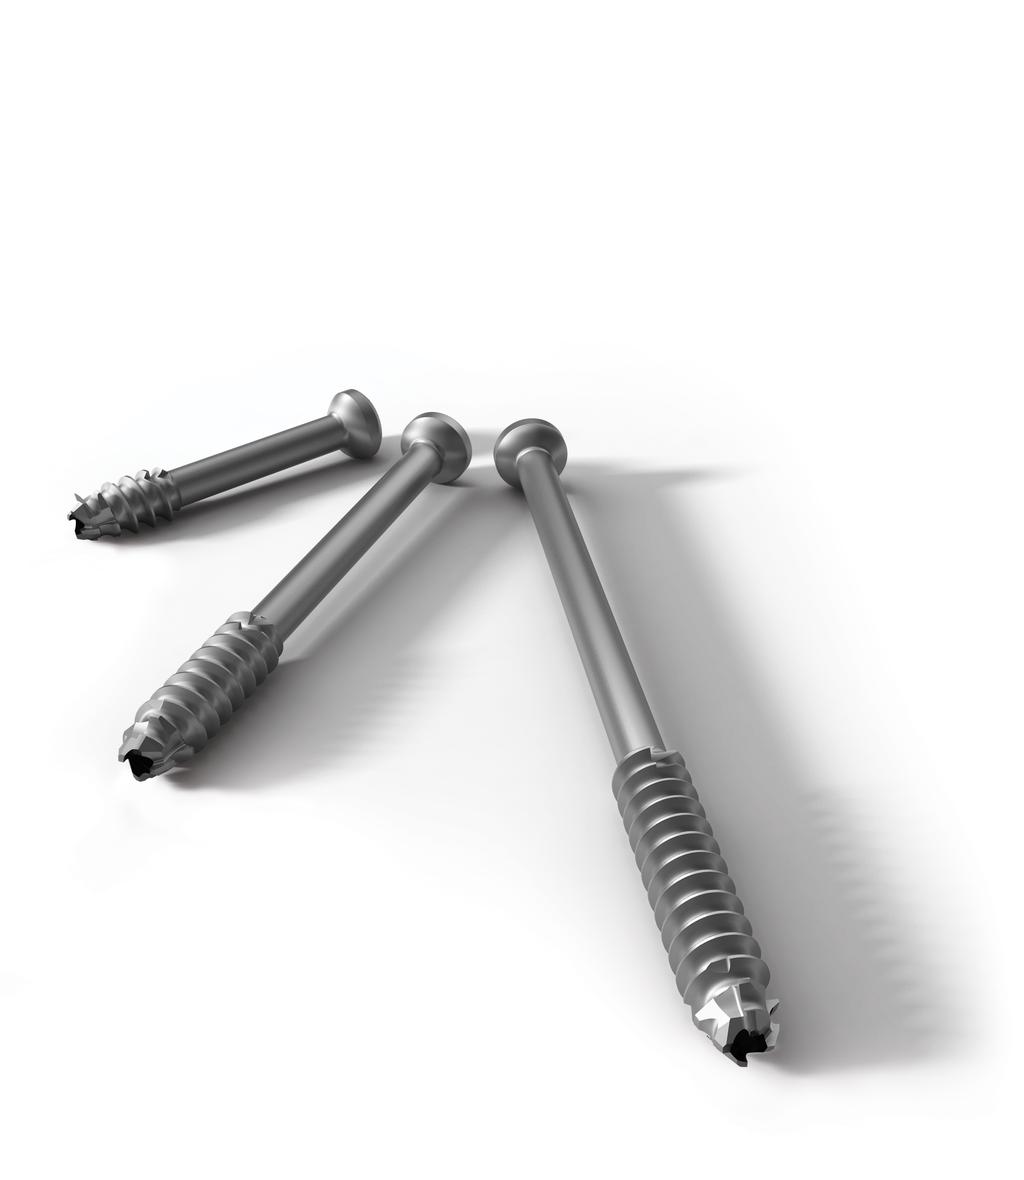 3.0 mm Cannulated Screw